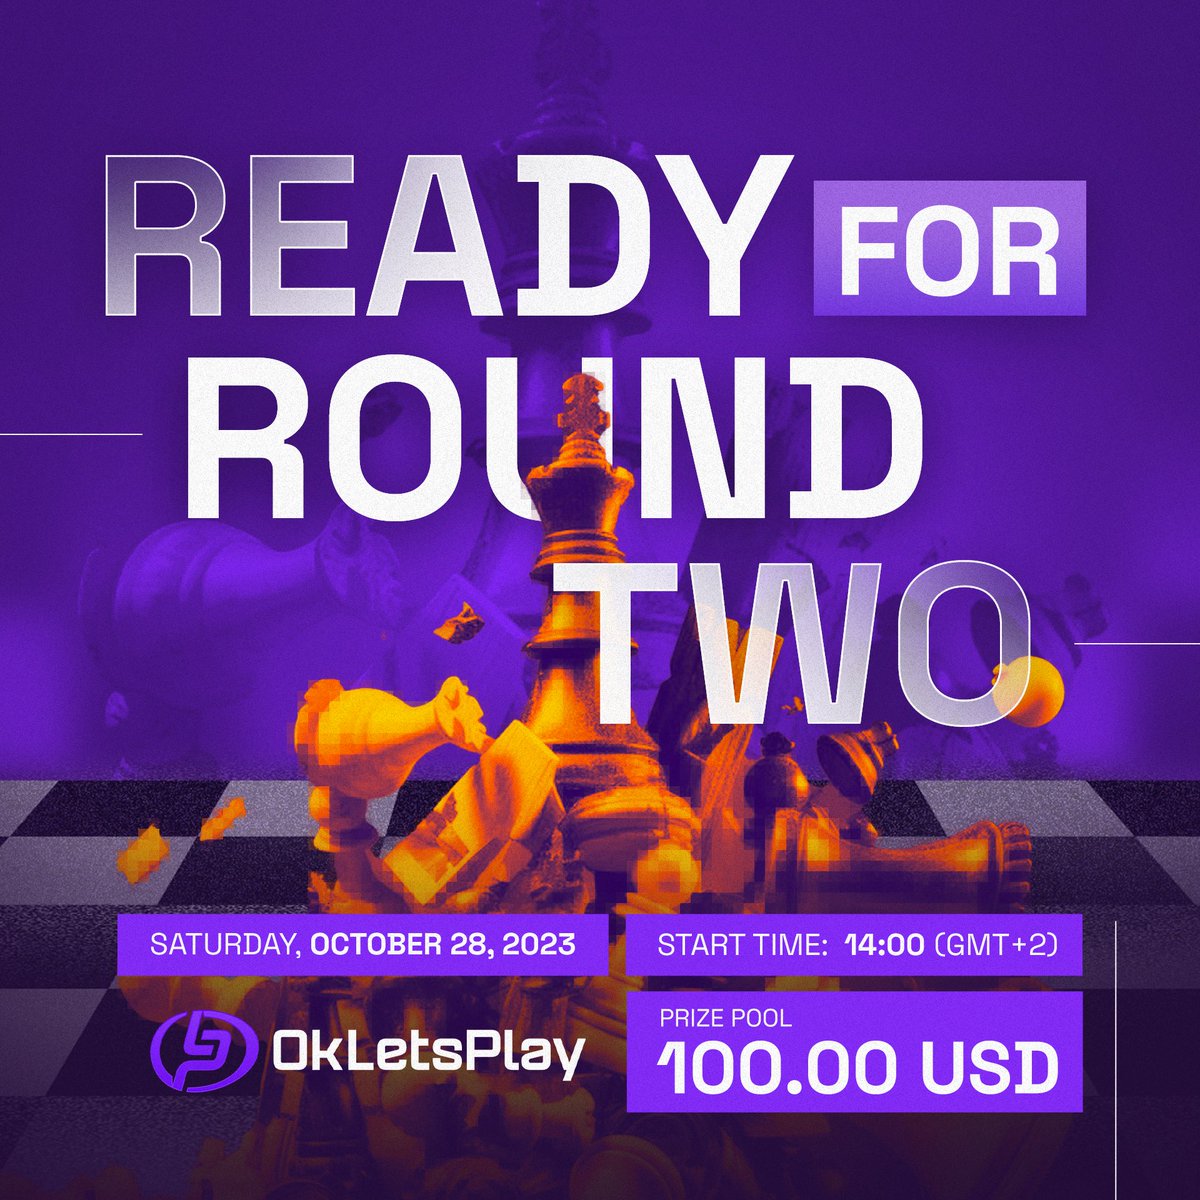 Ready for round two!?🏆 Join the OkLetsPlay FREE online World Chess tournament on Oct 28th at 2pm (GMT+2) and win the $100 prize! ♟️💵 Get in on the action! okletsplay.com/tournaments/65… #okletsplay #chesstournament #galaxyracer